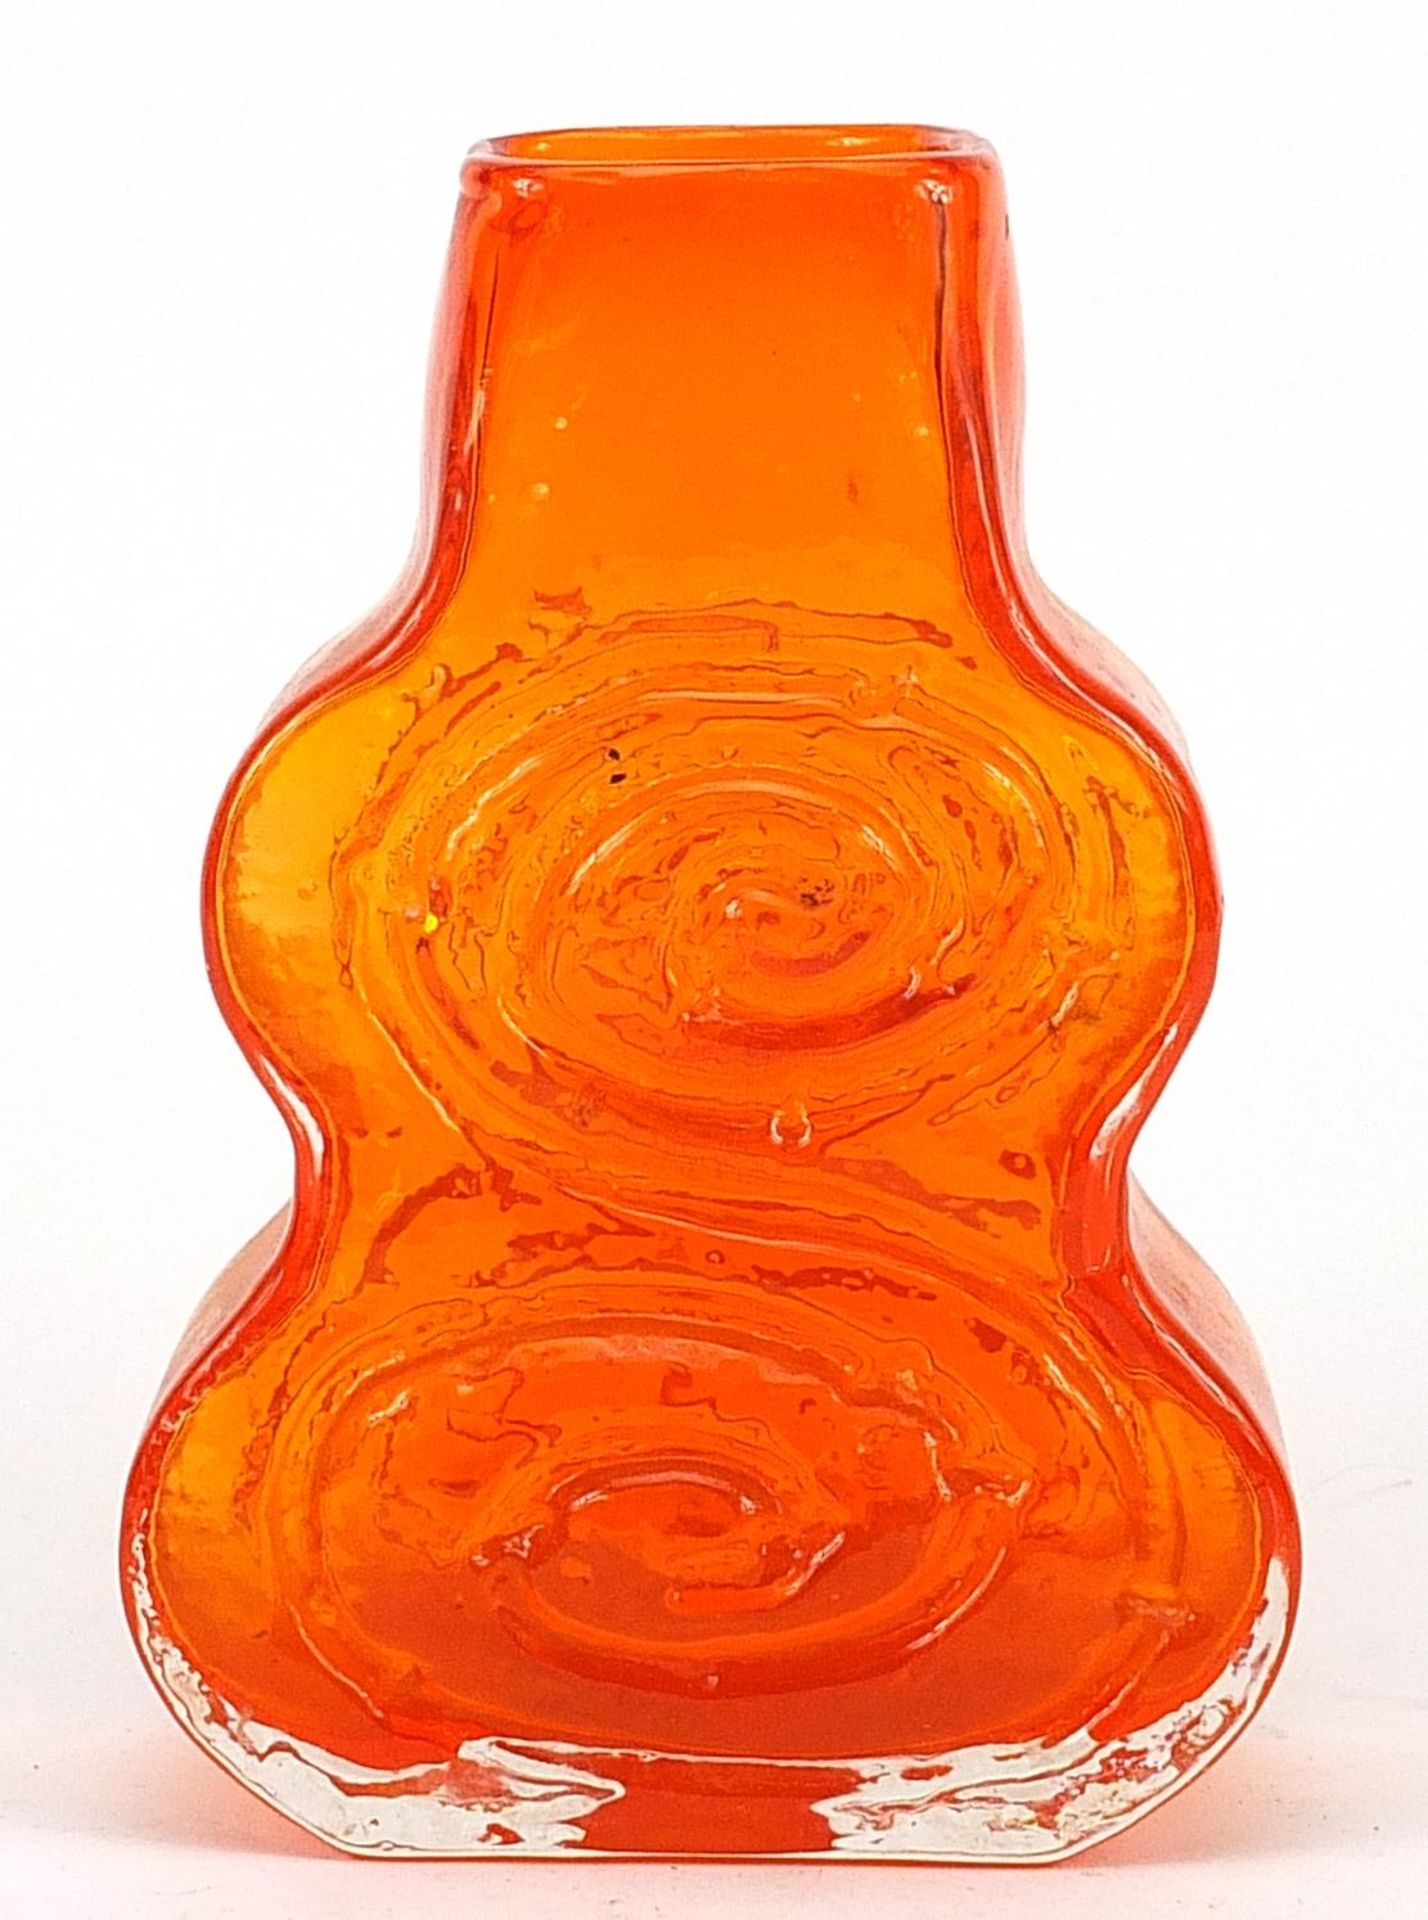 Geoffrey Baxter for Whitefriars, cello glass vase in tangerine, 18.5cm high Overall in generally - Image 2 of 3